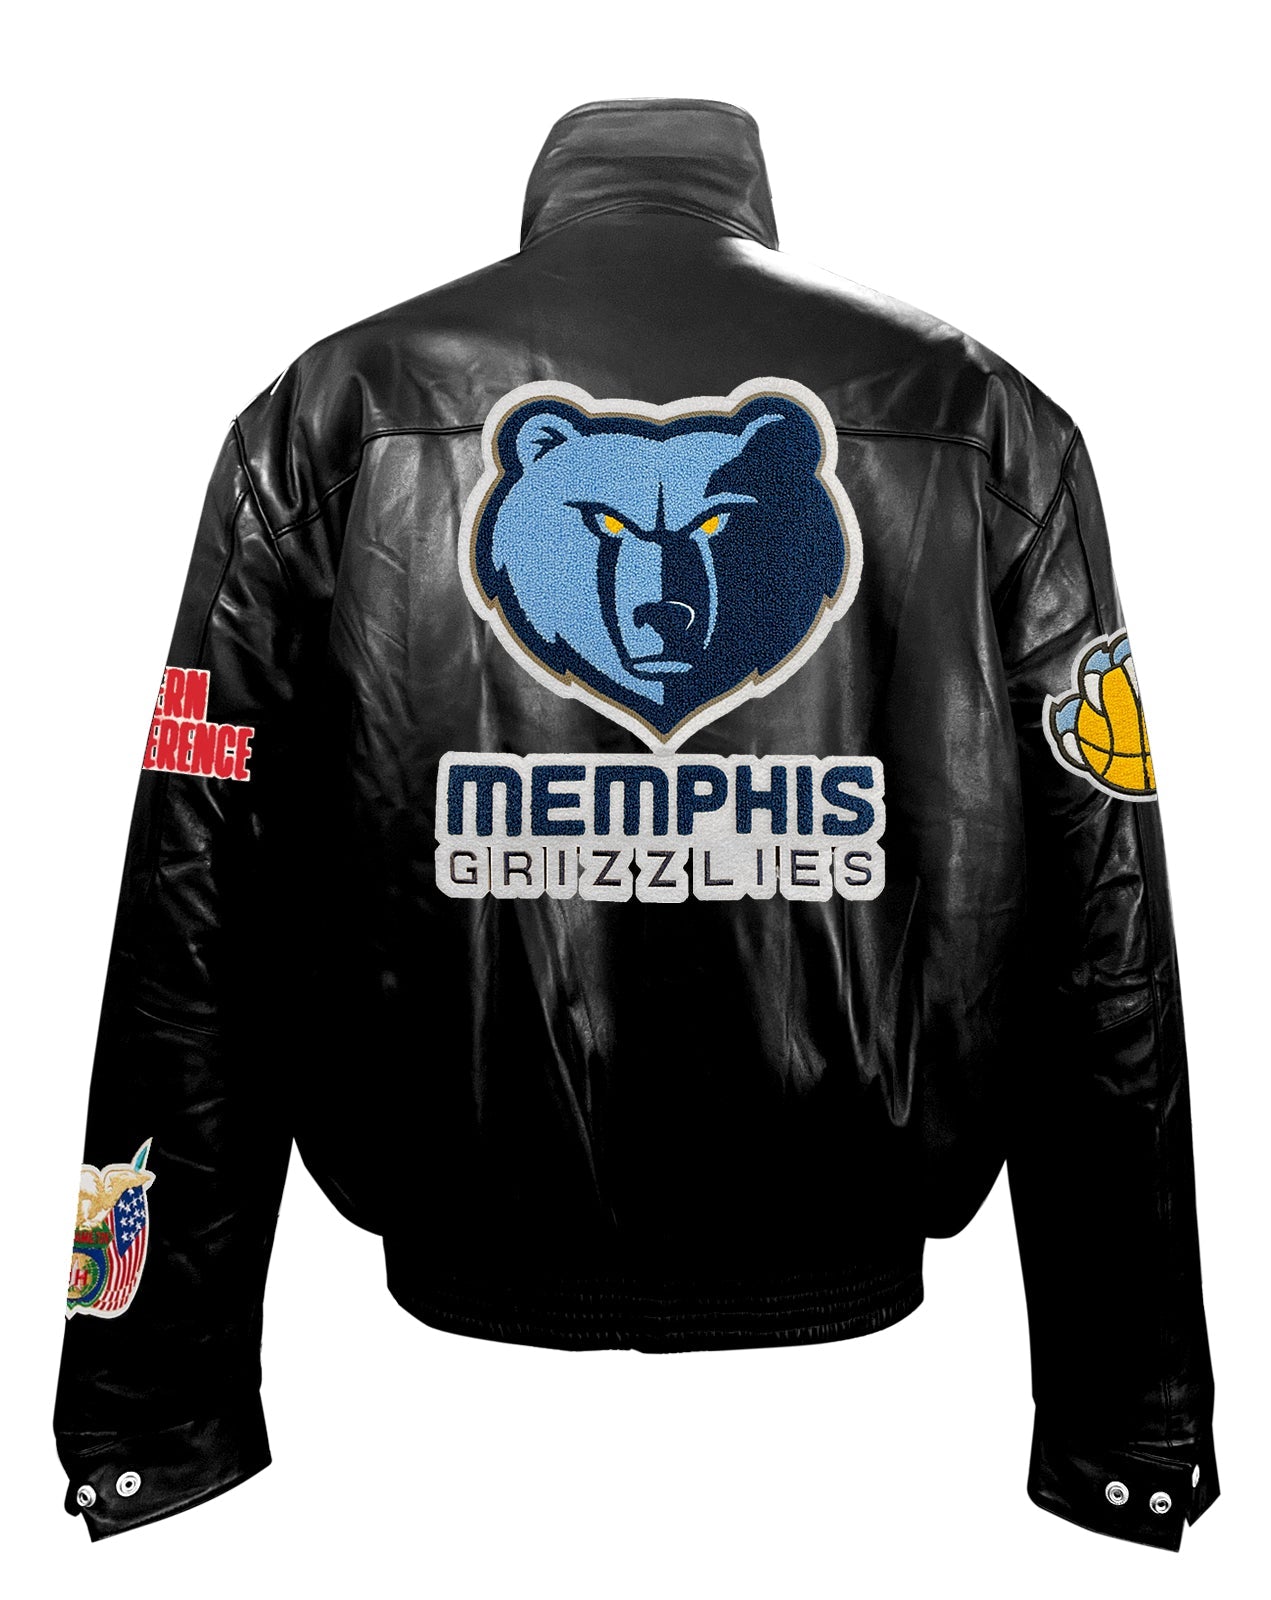 MEMPHIS GRIZZLIES FULL LEATHER PUFFER uses jacket Black